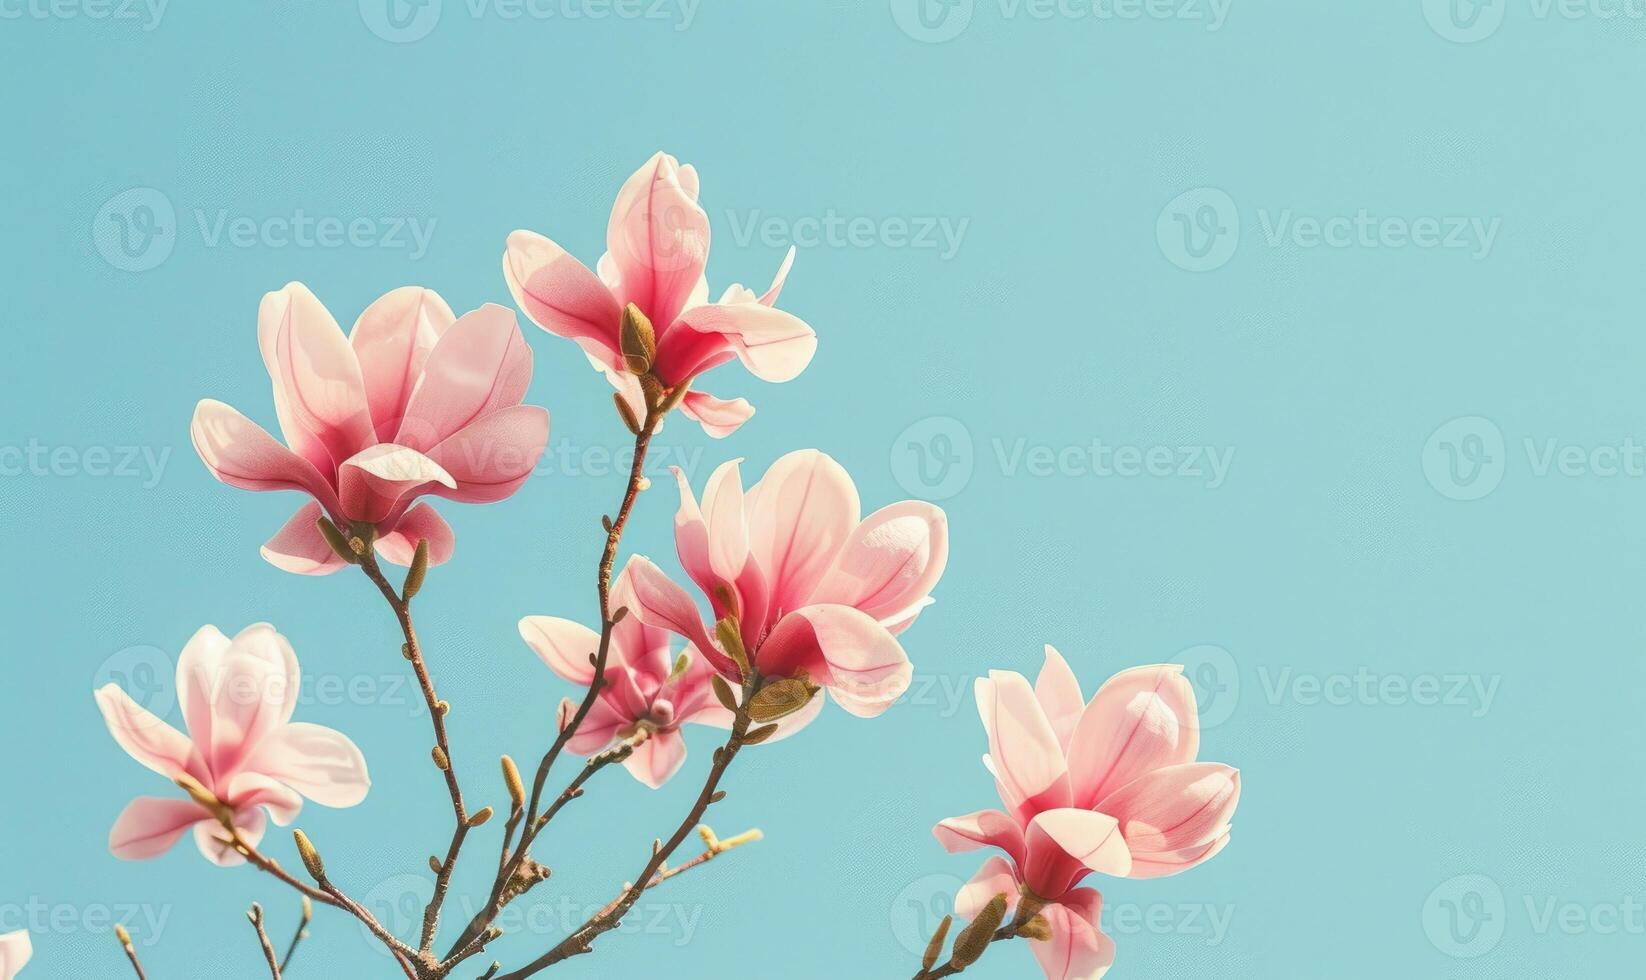 A cluster of pink magnolia blossoms against a clear blue sky photo